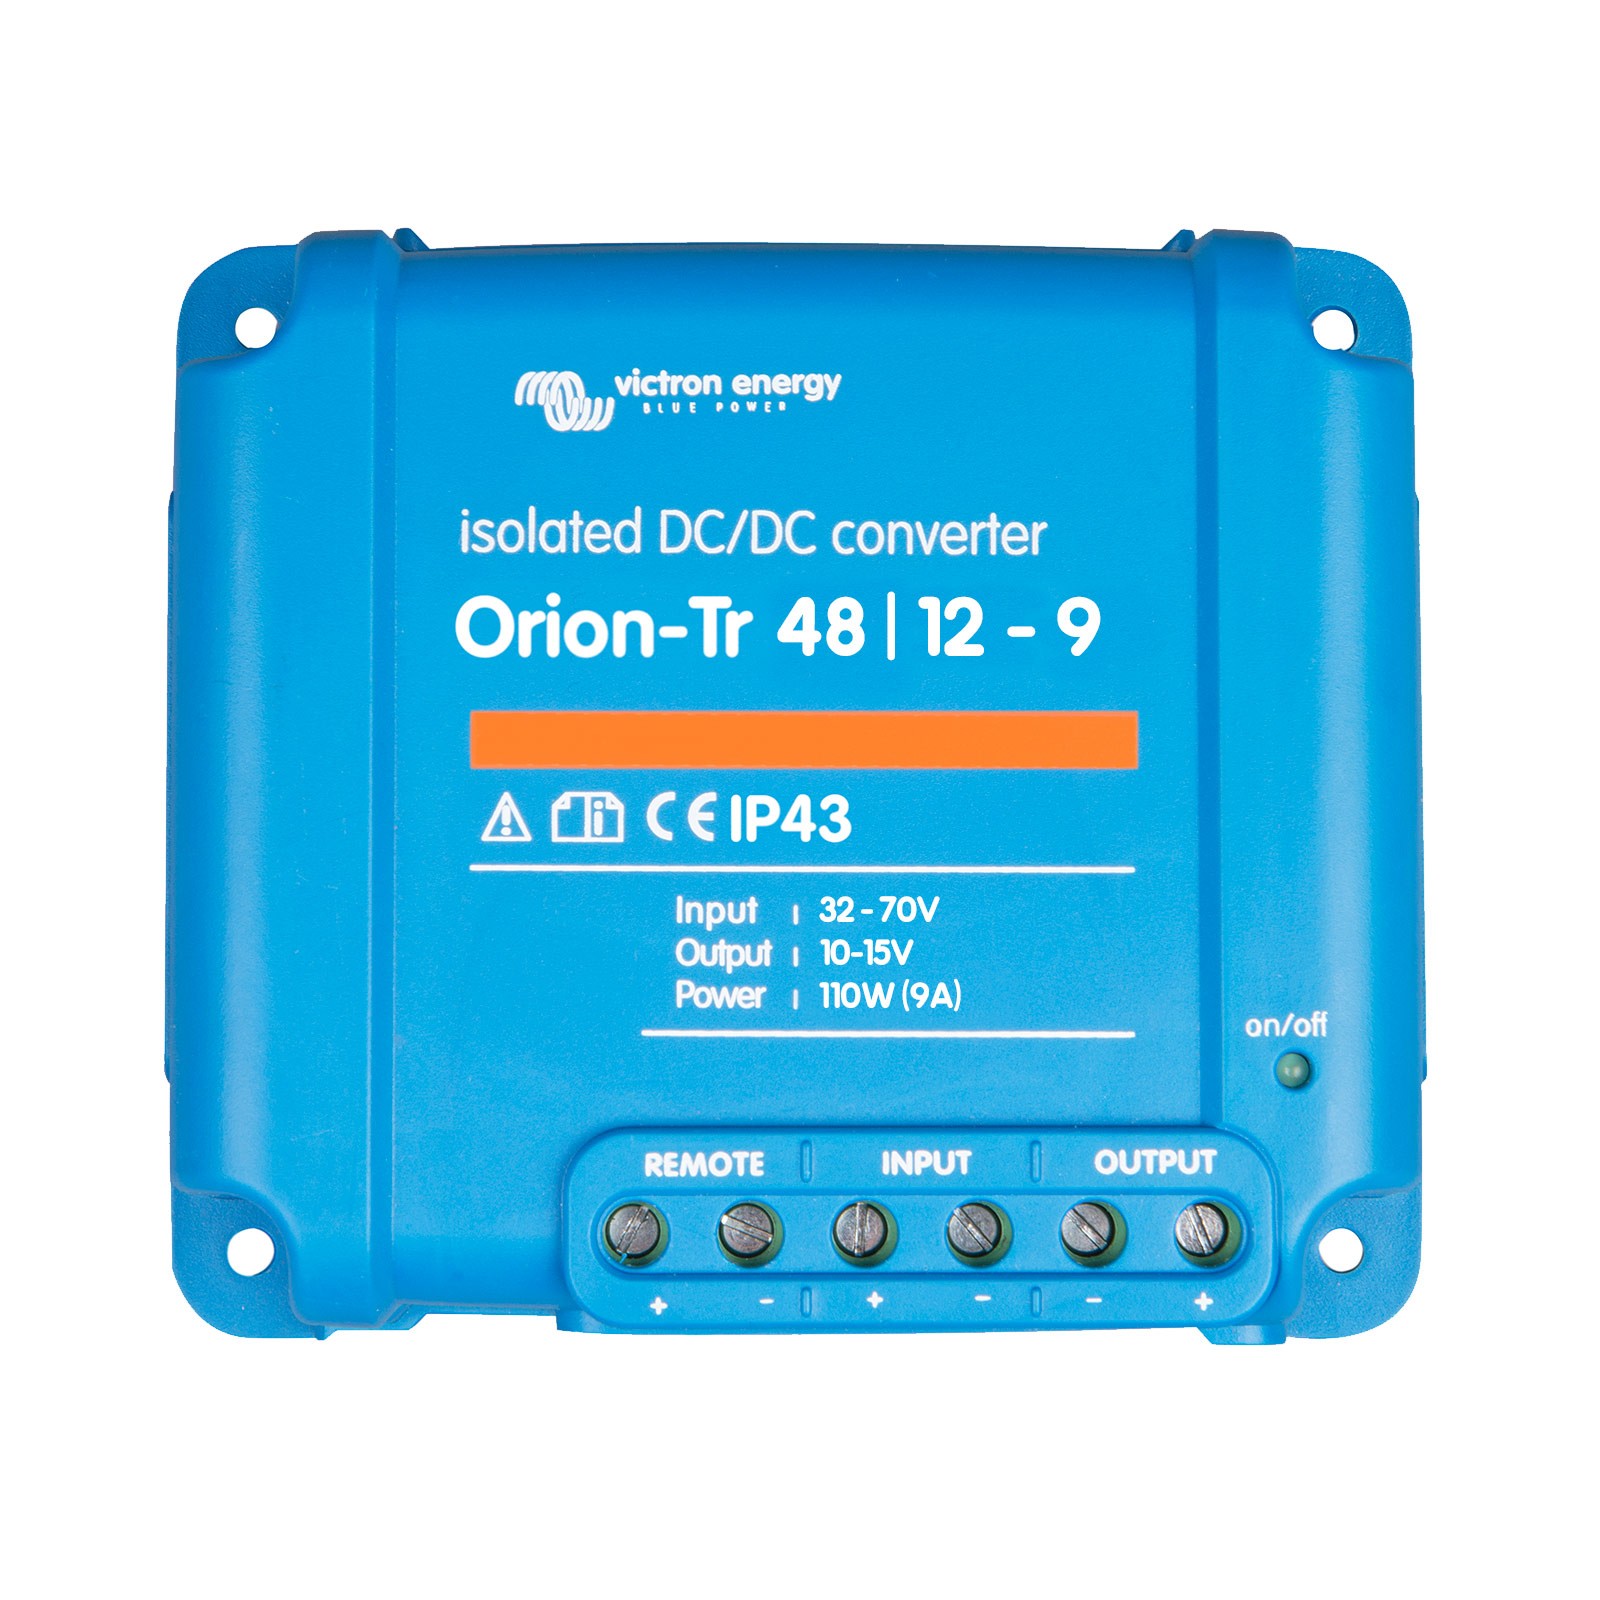 Isolierter Konverter Orion-Tr 48/12-9 A Victron Energy